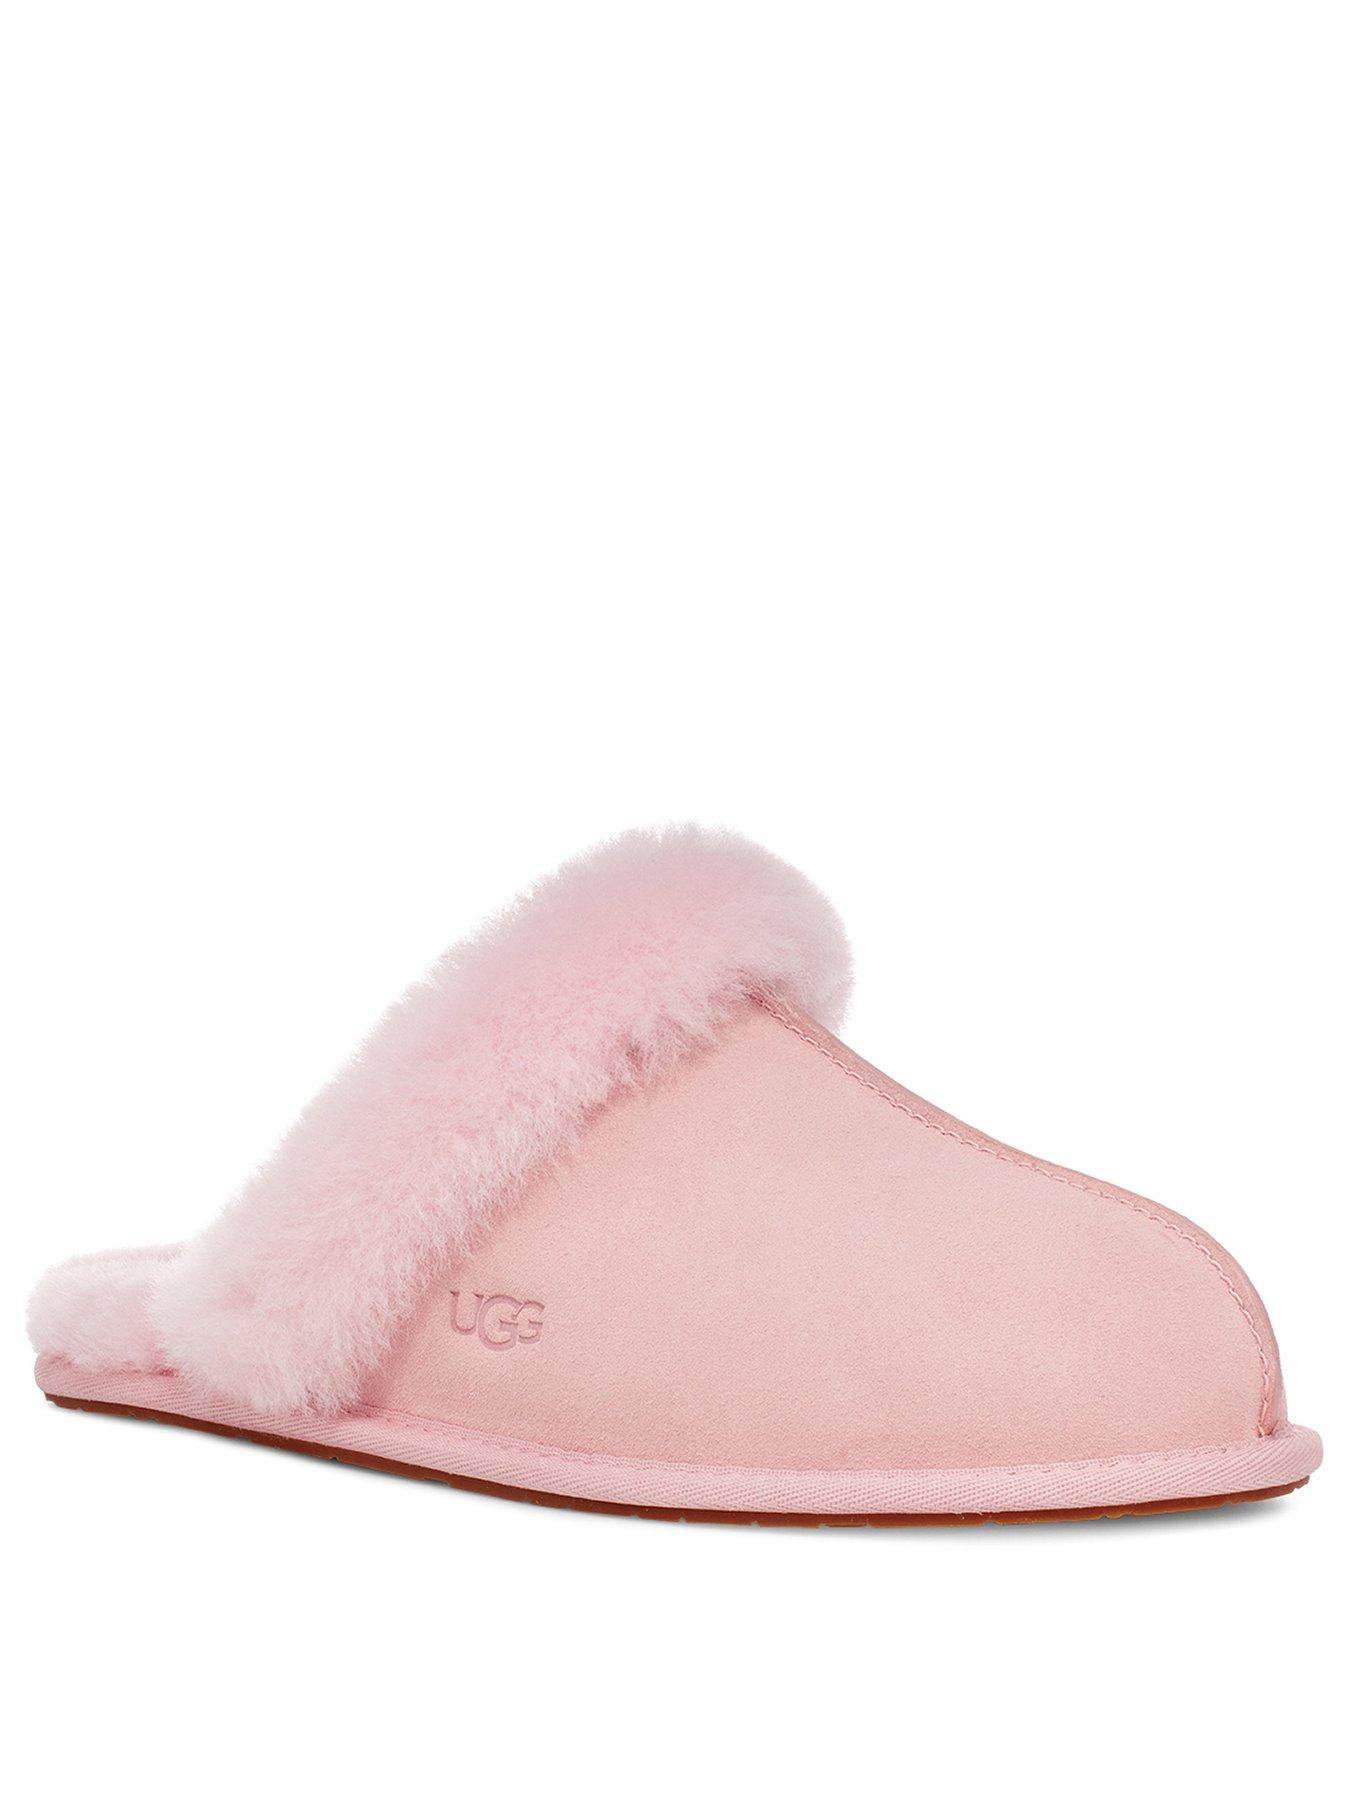 ladies ugg slippers size 5